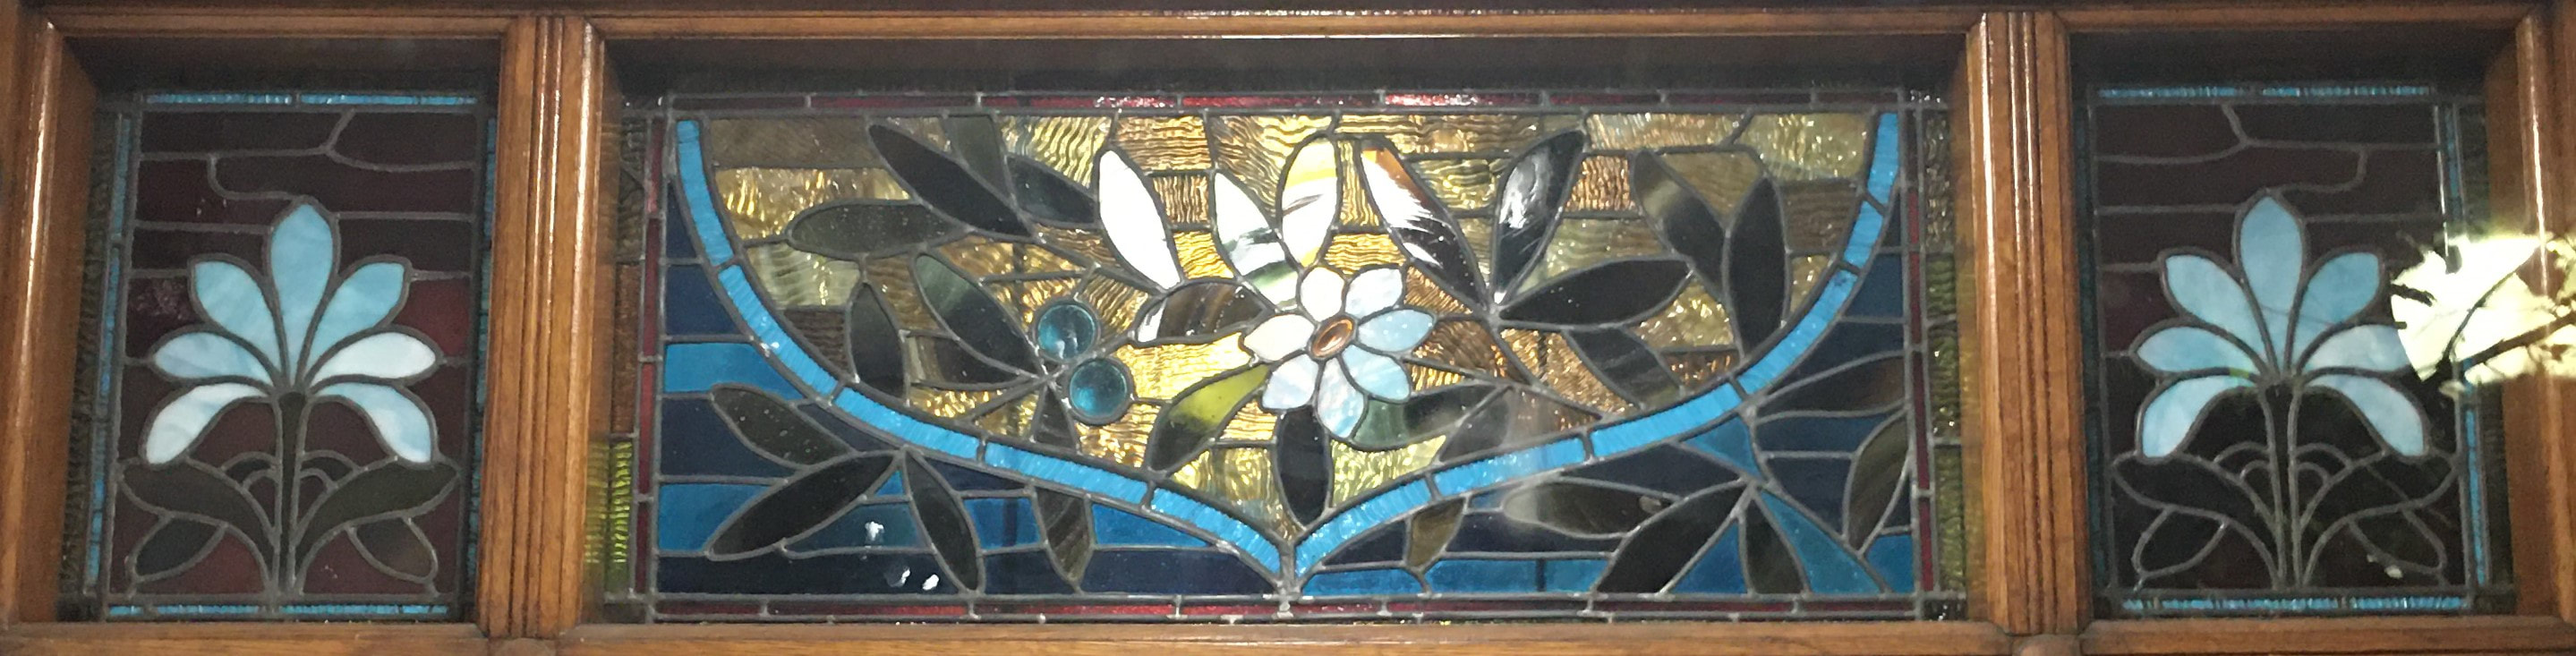 Belcher Mosaic Glass Company - Offered by ANTIQUE AMERICAN